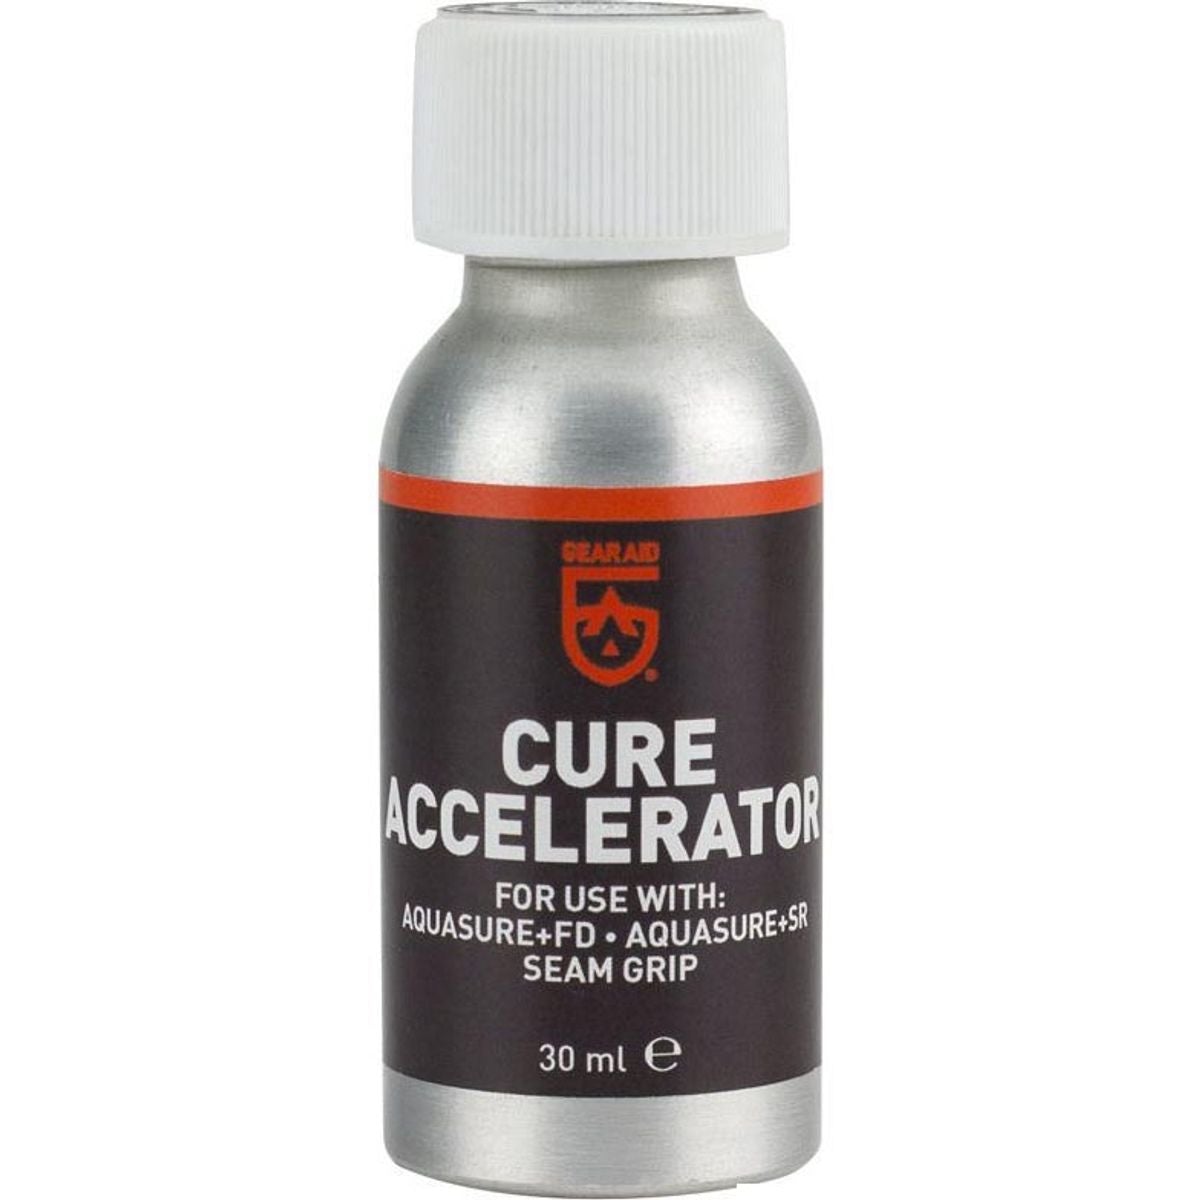 Gear Aid Cure Accelerator (Herder), 30ML-Packraft Norge